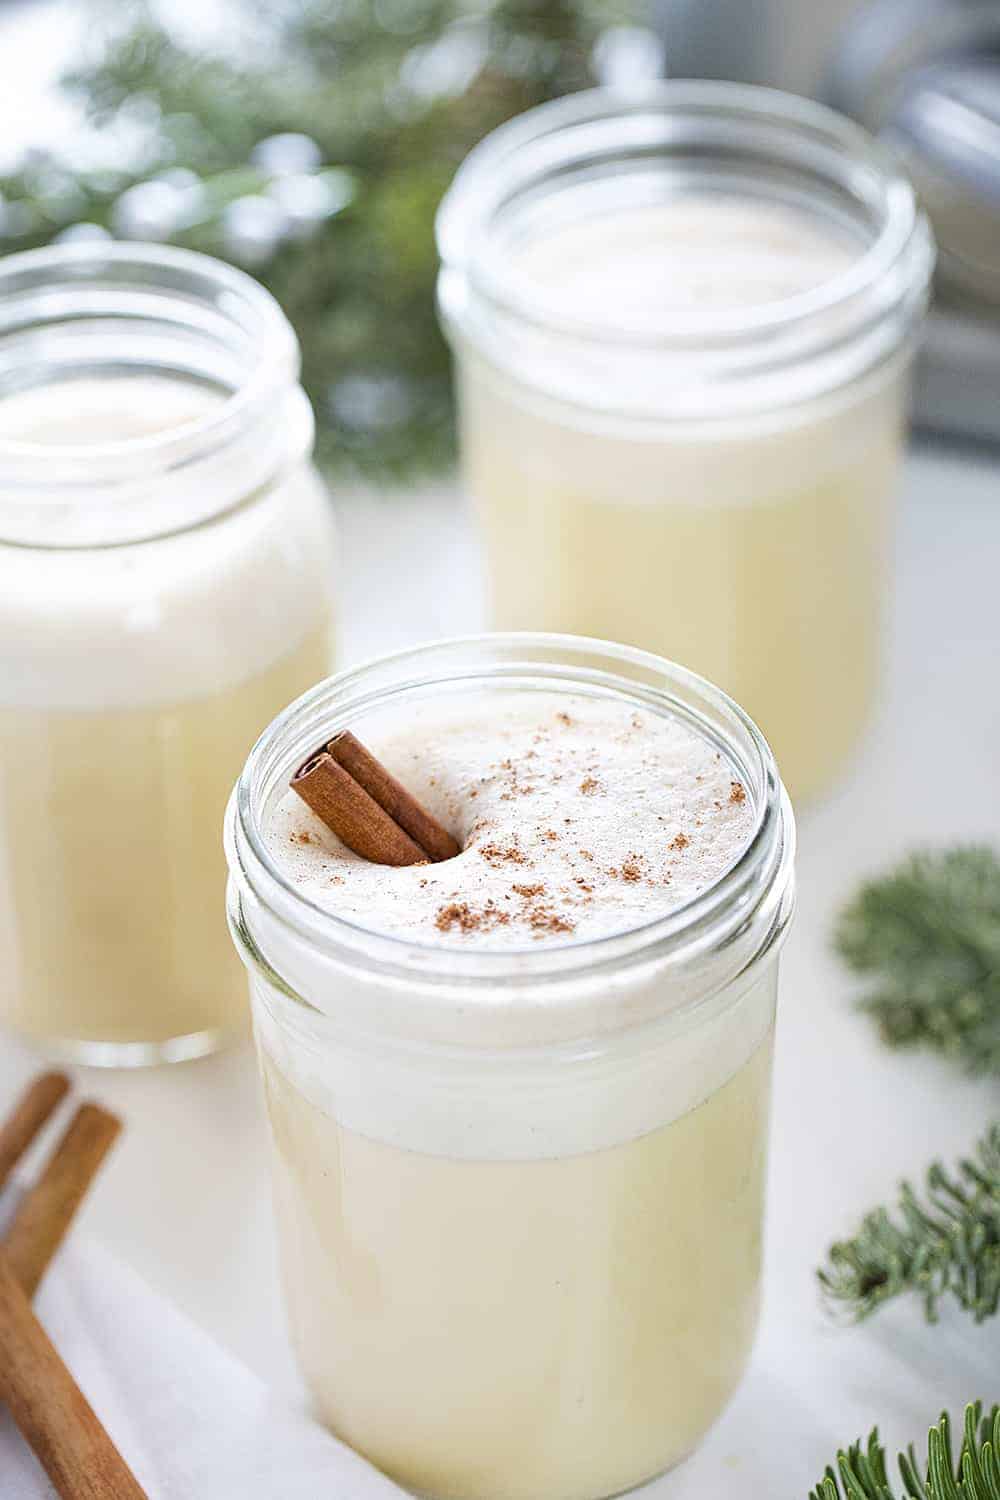 Easy Blender Eggnog Recipe with 3 Jars and a Cinnamon Stick